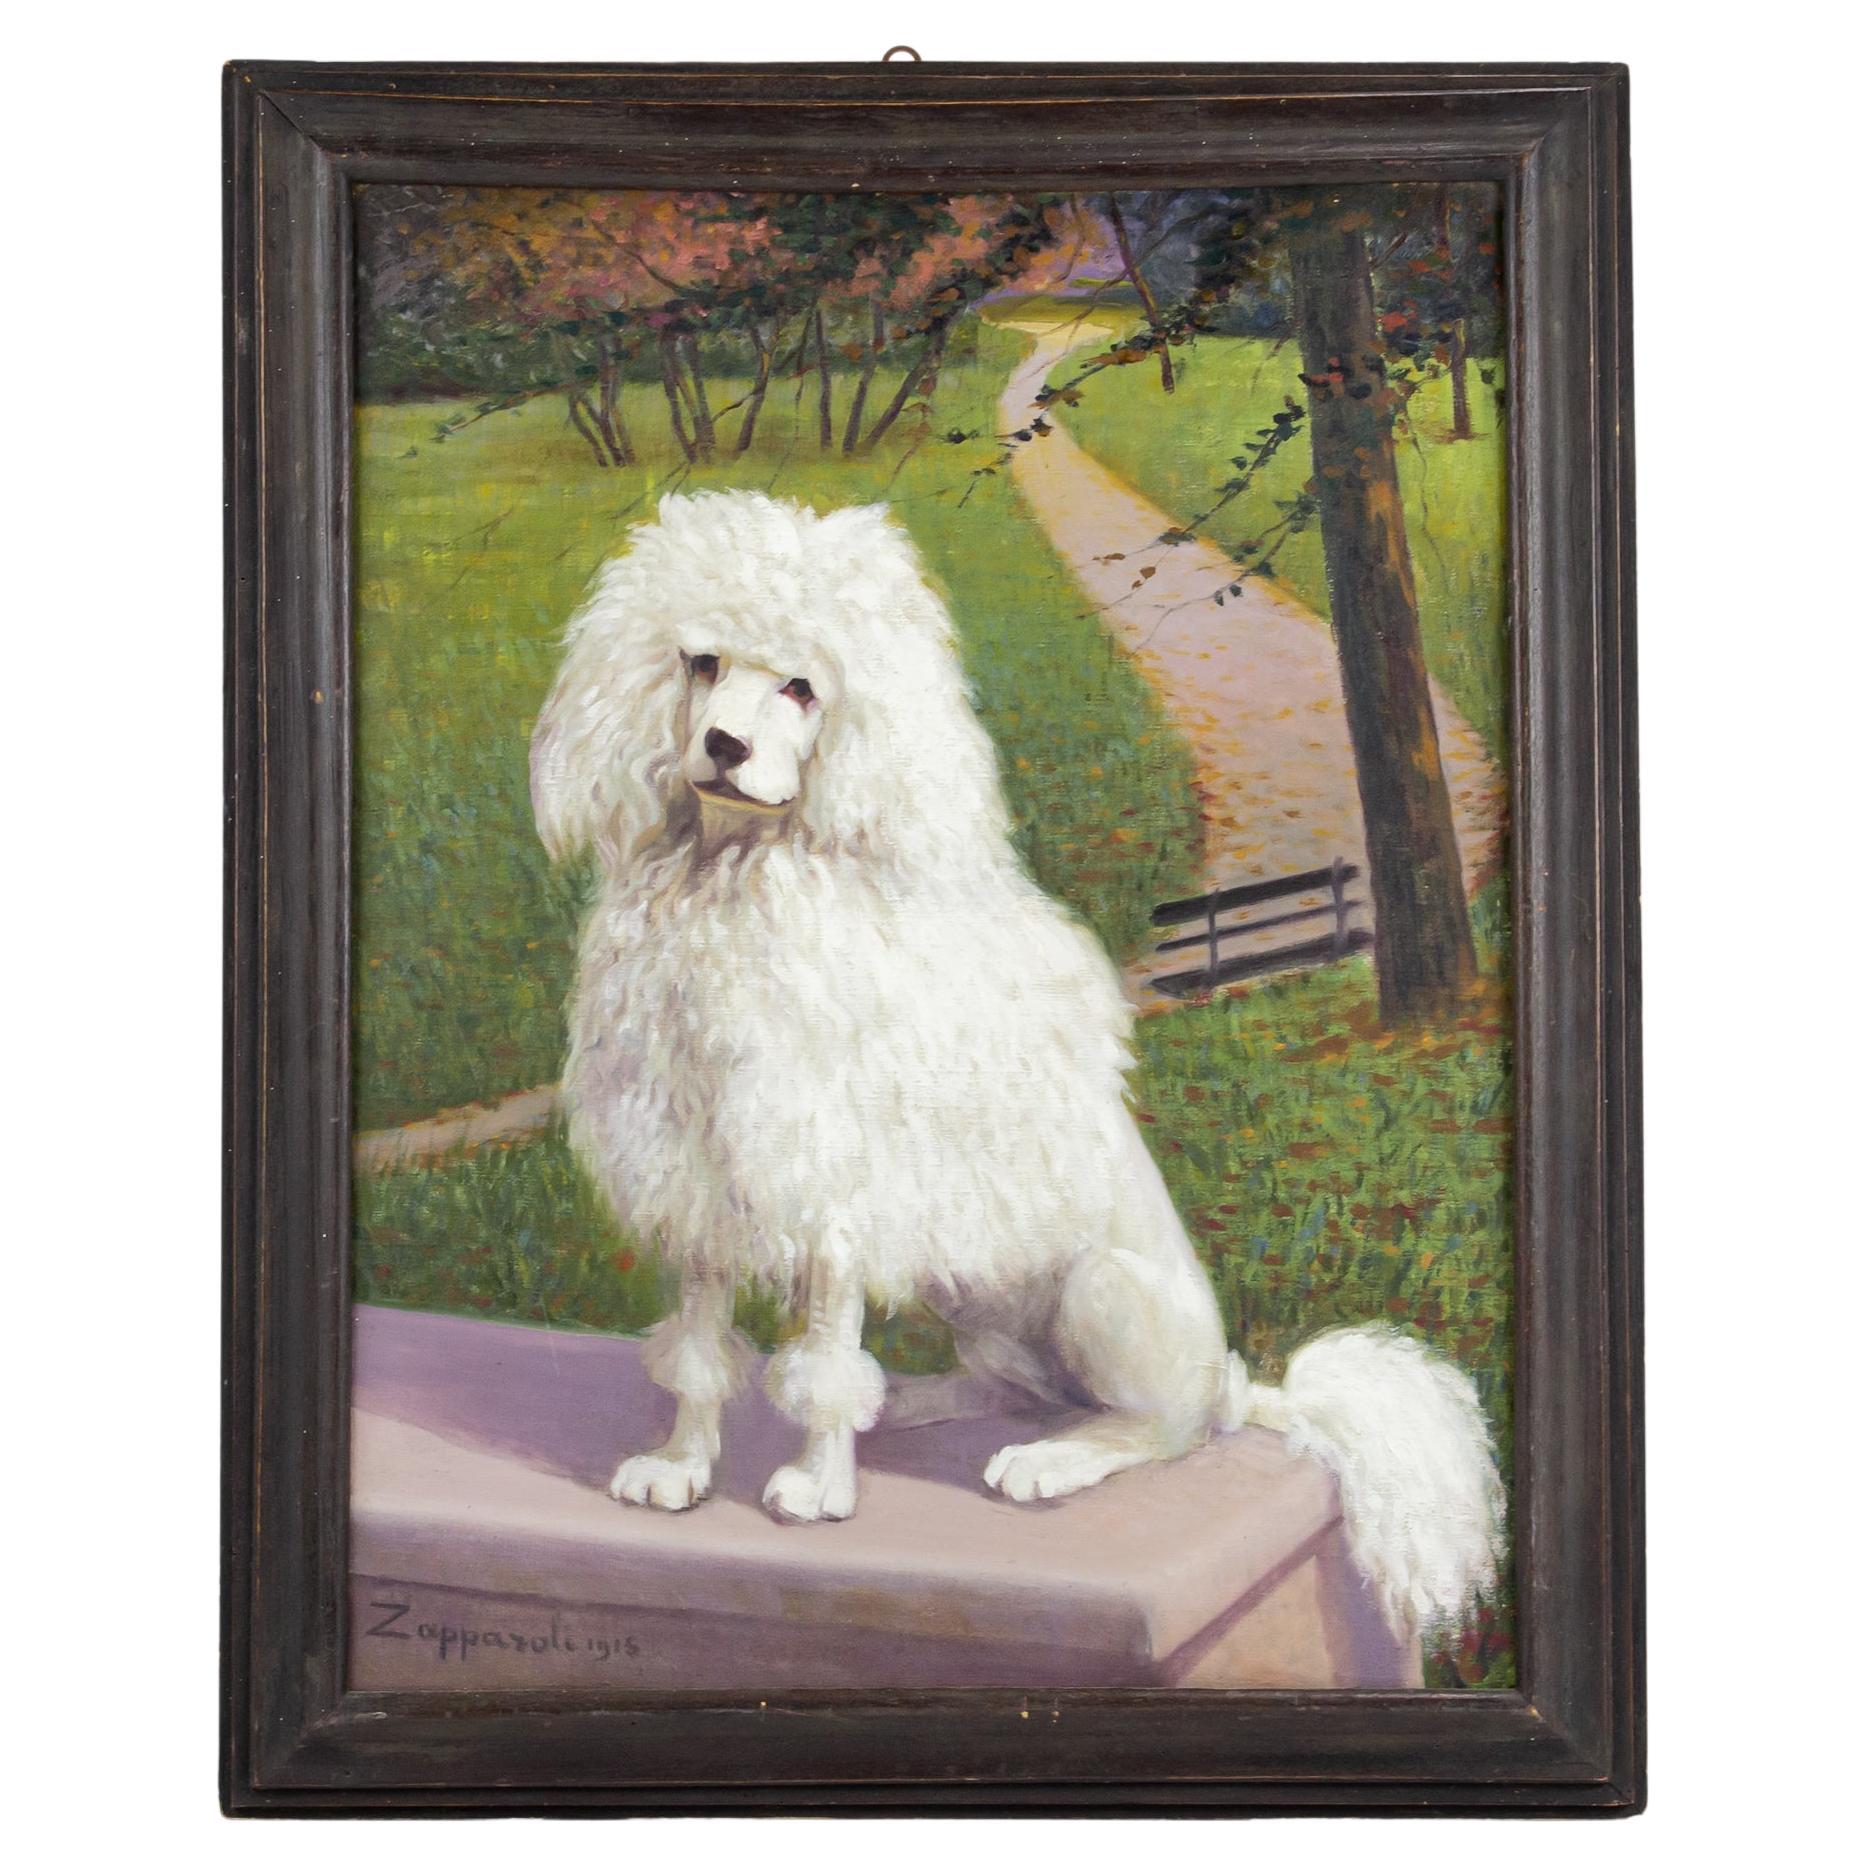 Early 20th Century Oil on Canvas Dog Portrait of a White Poodle